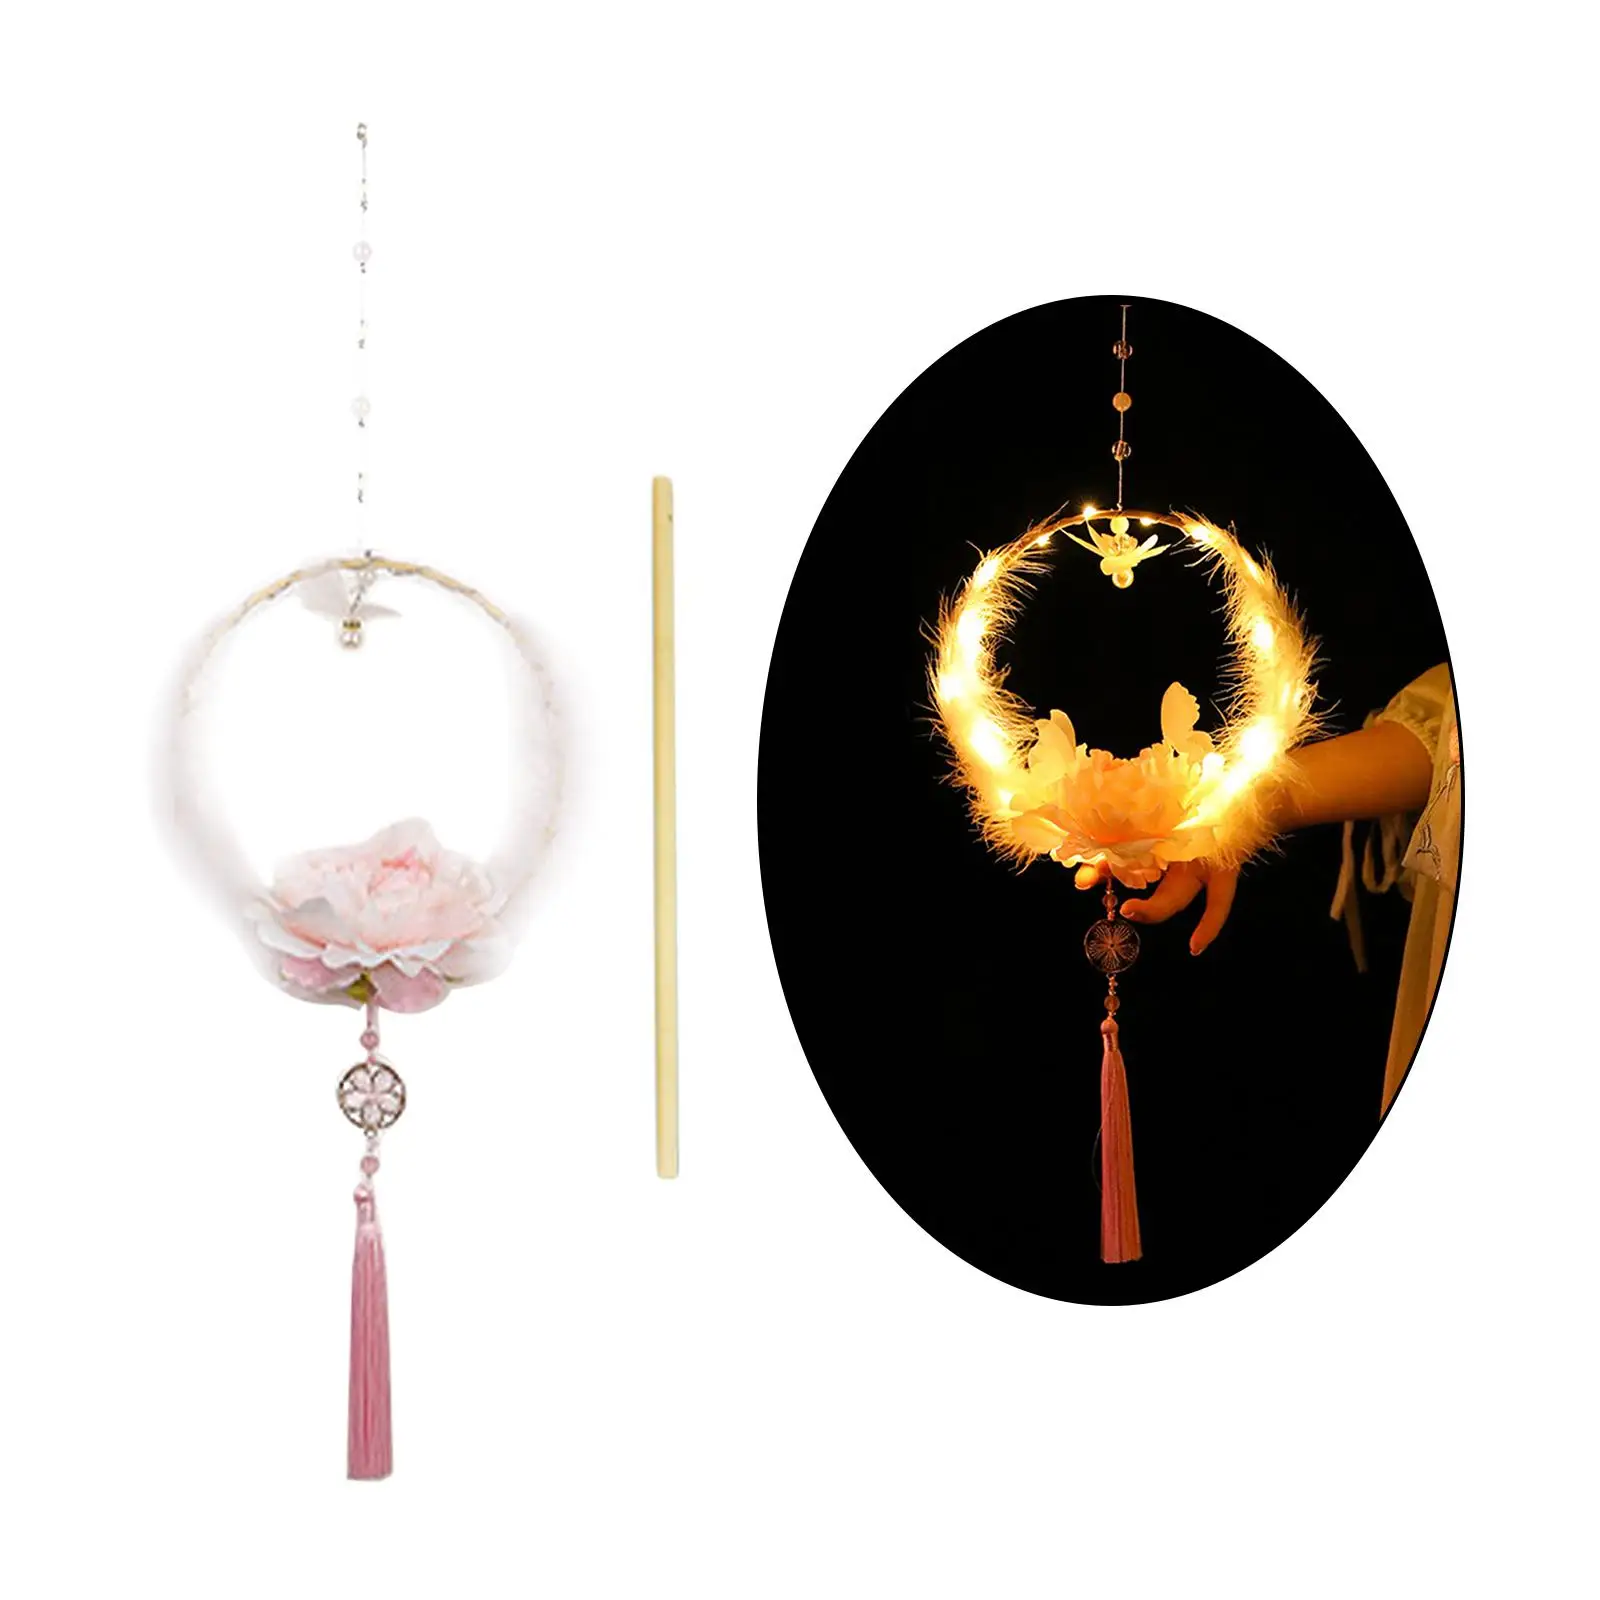 Ancient Lantern Decoration Supplies Glowing Toy Hanfu Accessories Retro Tassel LED Lights for Chinese New Year Gifts Holiday